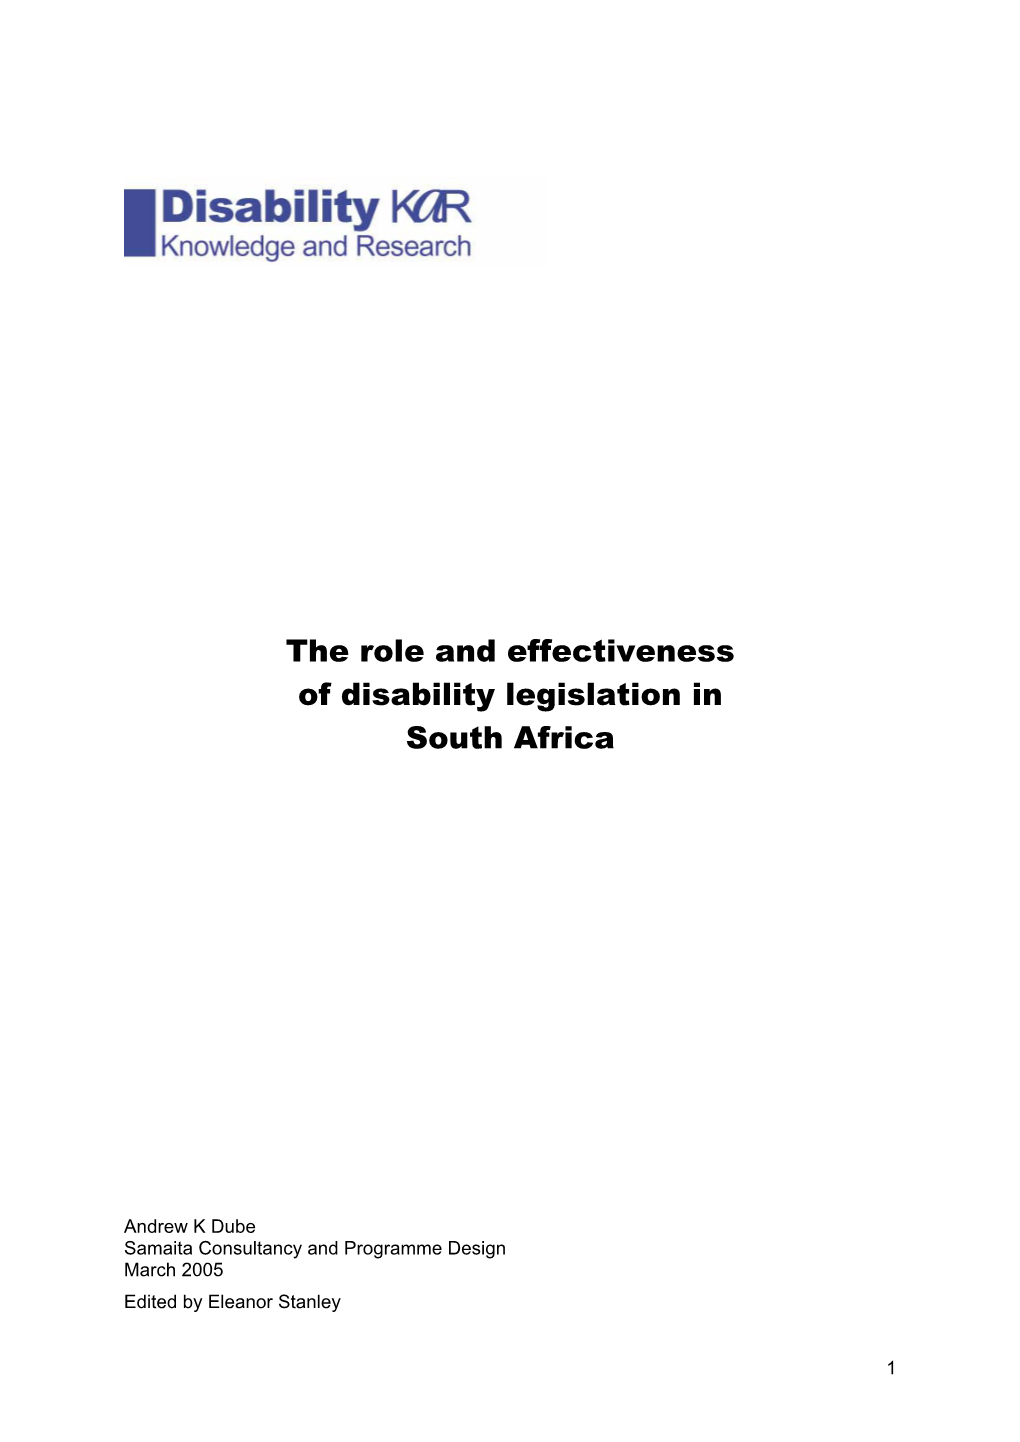 The Role and Effectiveness of Disability Legislation in South Africa